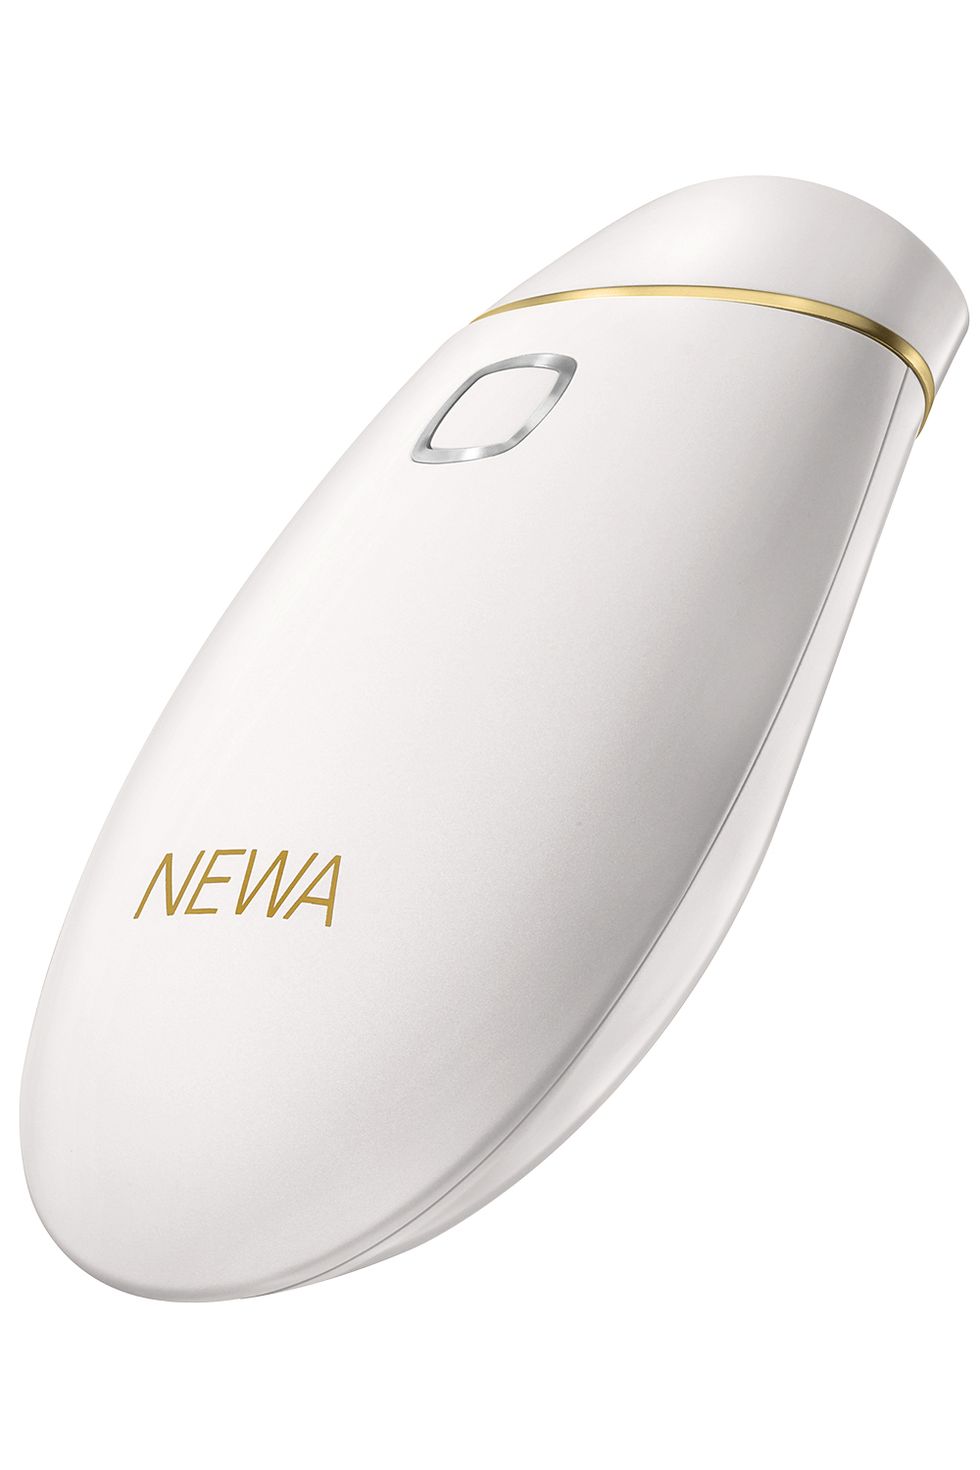 <p>Radio frequency treatments in derms' offices firm skin, as heat triggers fresh collagen. Take the tech home at a lower power with this handheld. Expect results in 30 to 60 days, says Wexler.</p><p><strong>Newa Skin</strong> Rejuvenation System 1.5, $499<span class="redactor-invisible-space">, <a href="http://www.newaonline.com/newa-skin-rejuvenation-system" target="_blank">newaonline.com</a>. <br></span></p>